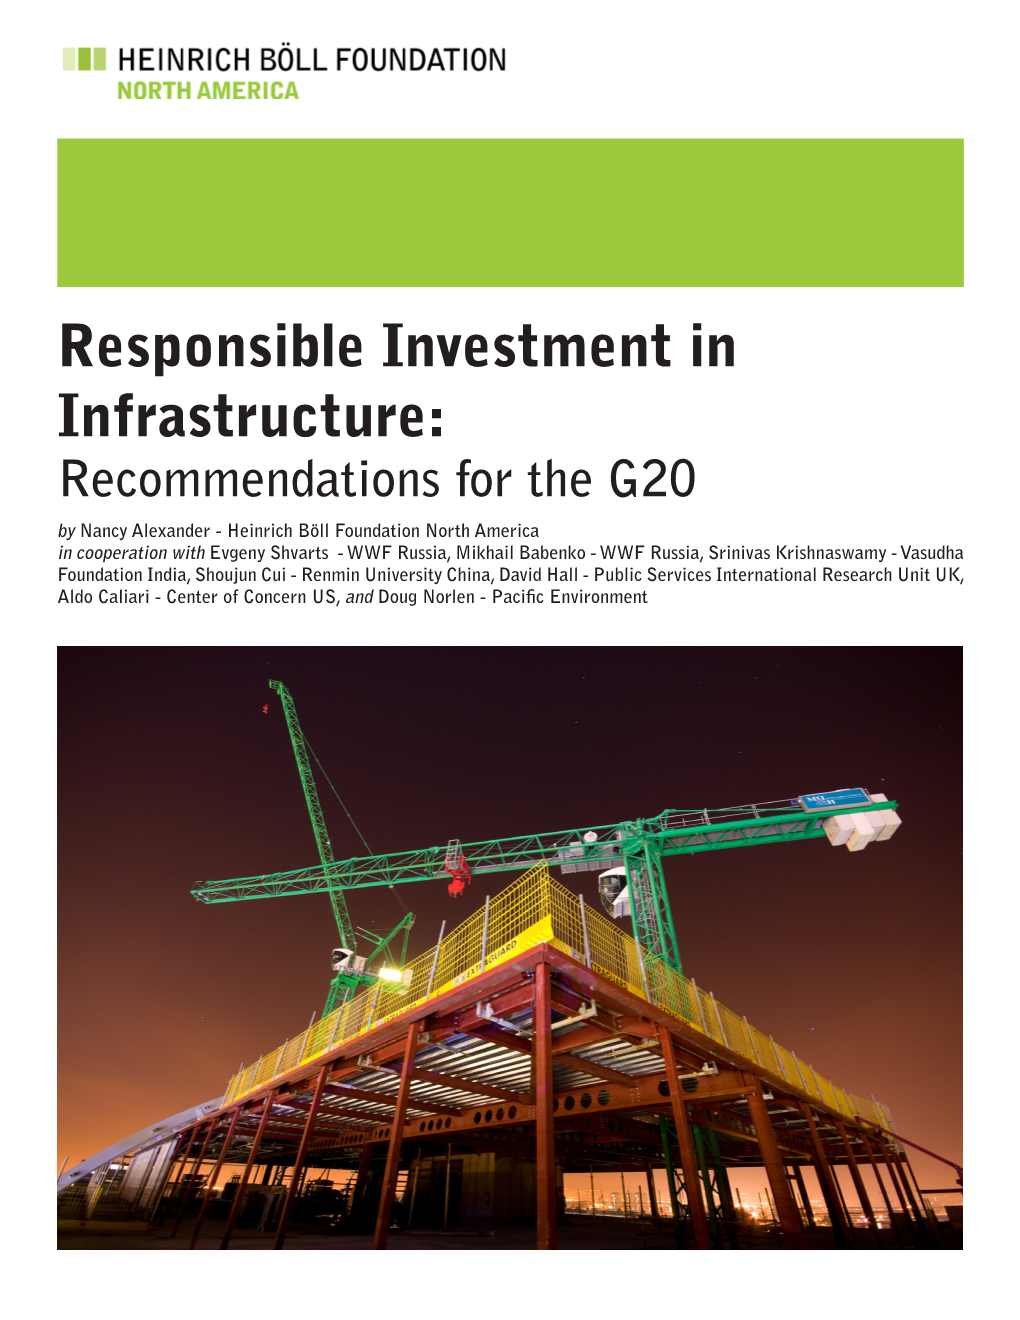 Responsible Investment in Infrastructure: Recommendations for The